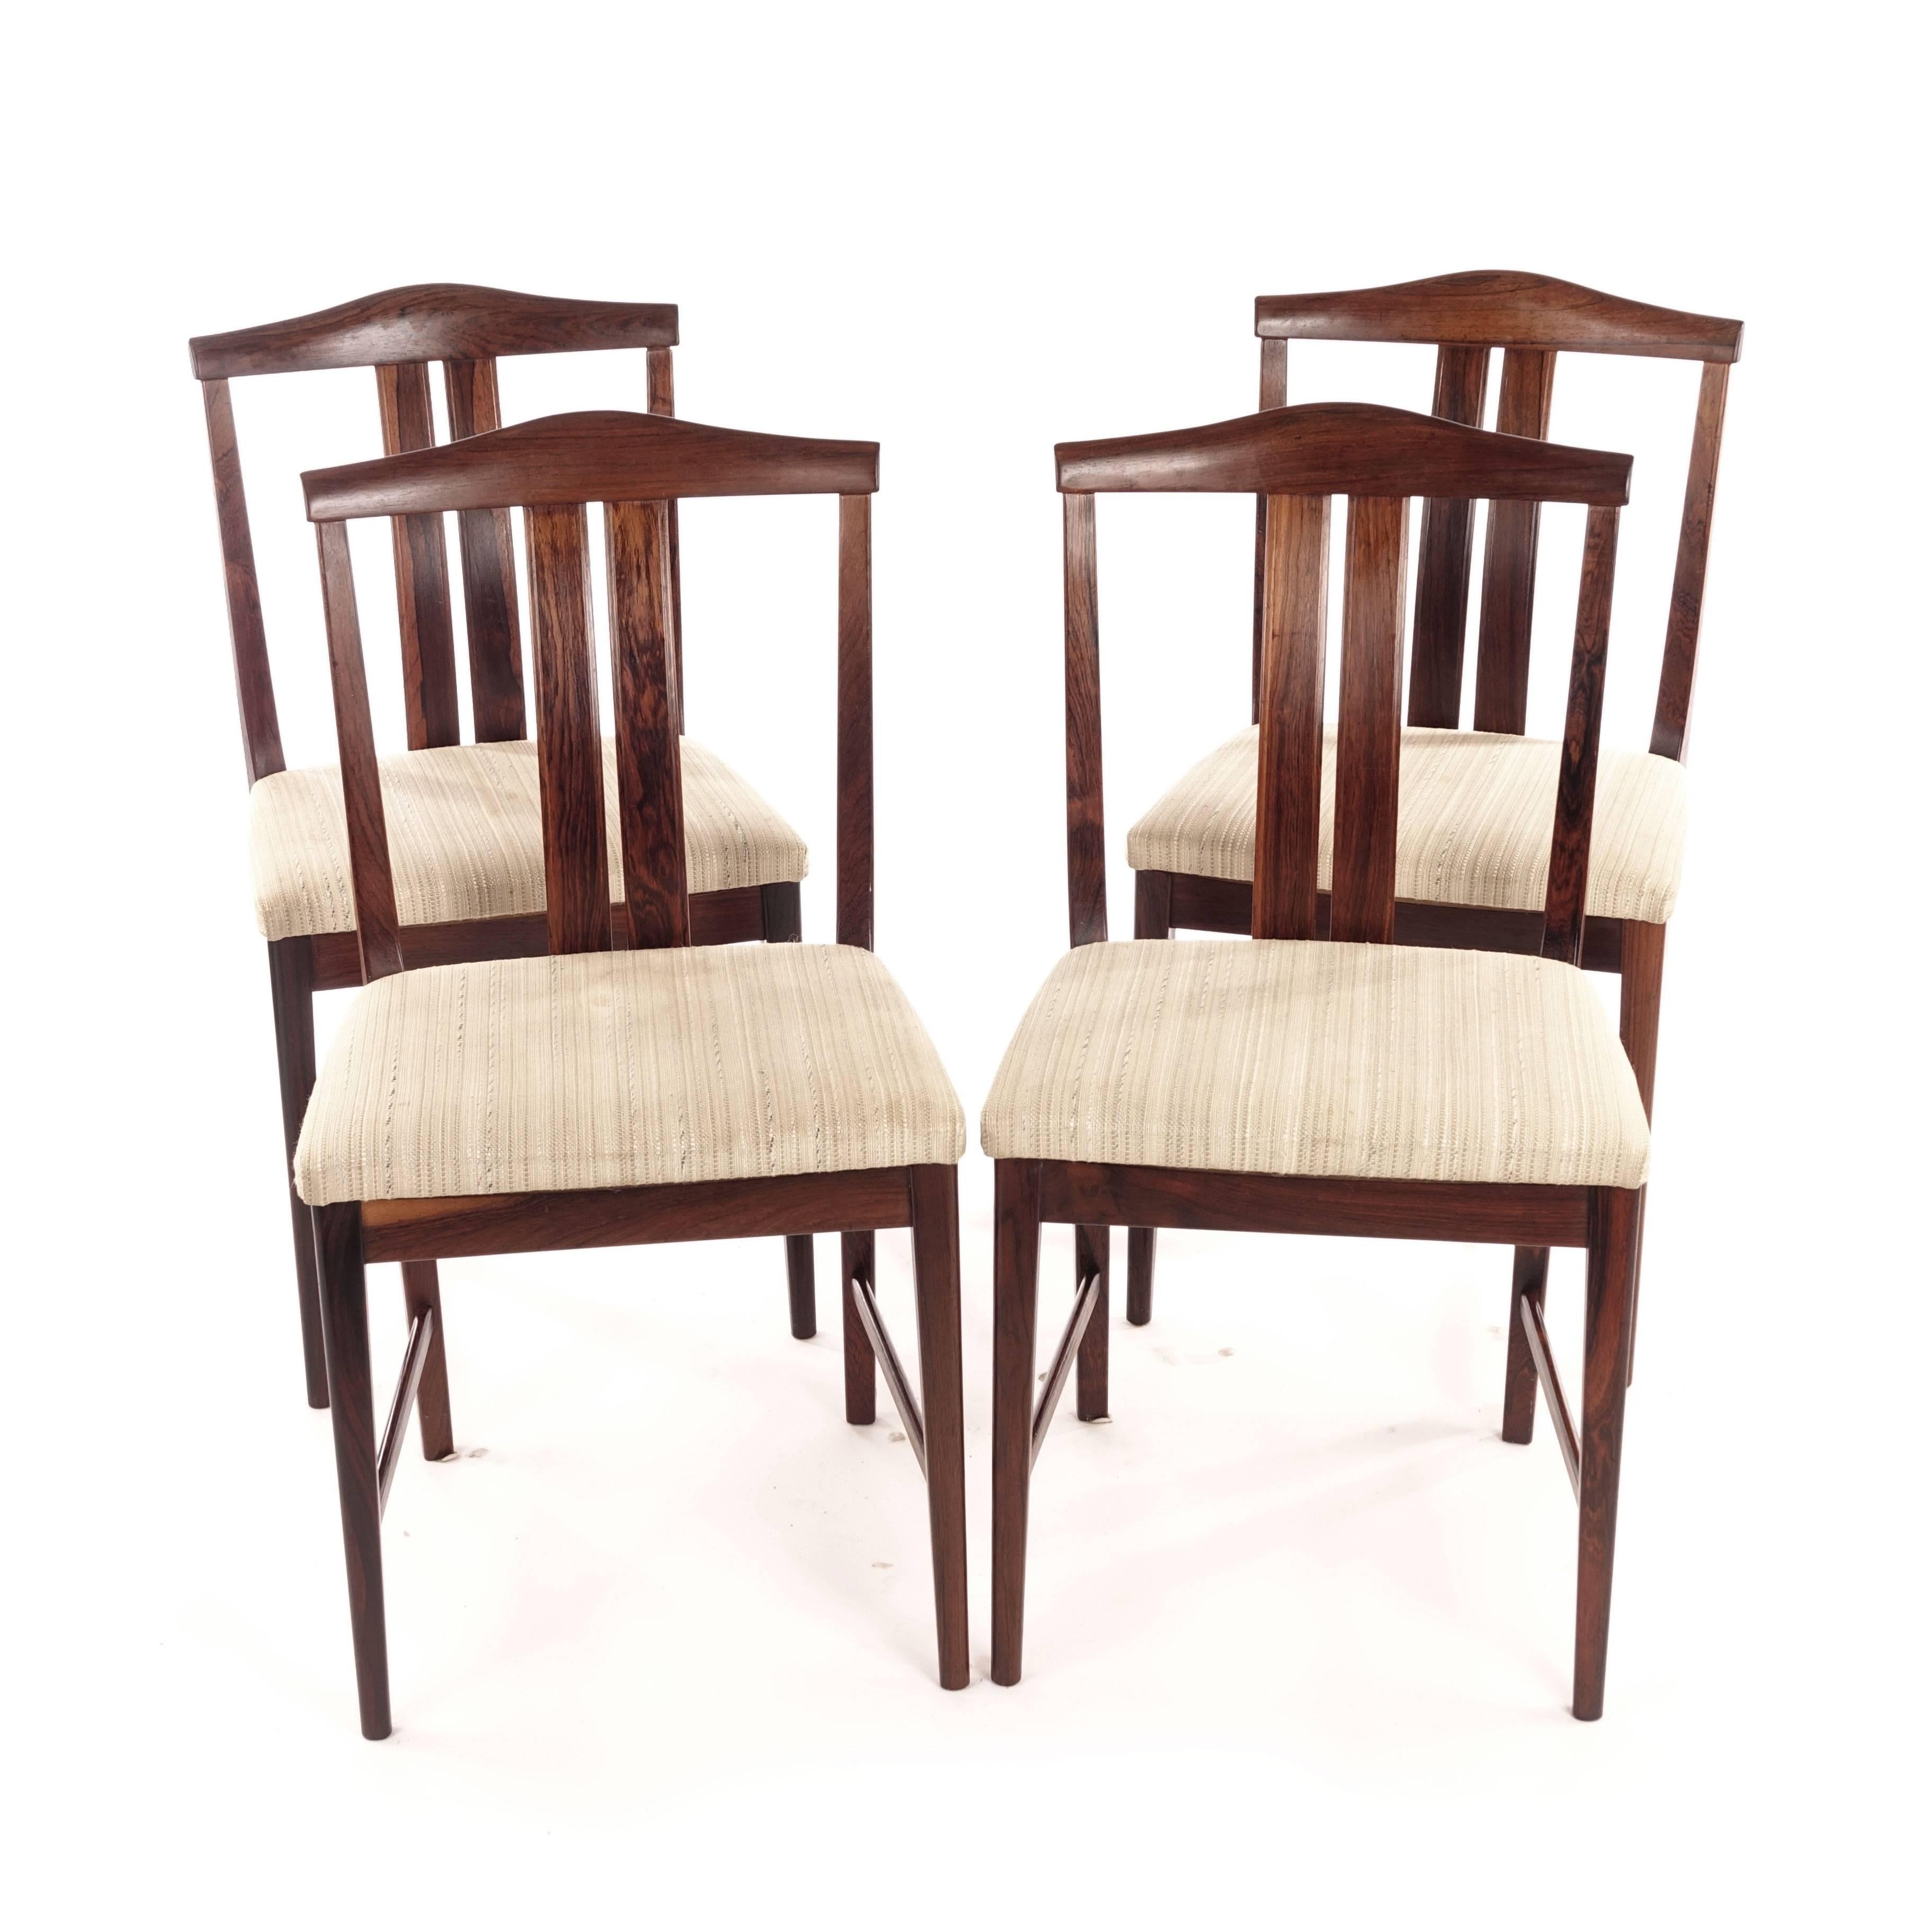 Mid-20th Century Swedish Rosewood chairs, Designed by Bertil Fridhagen, 1960s For Sale